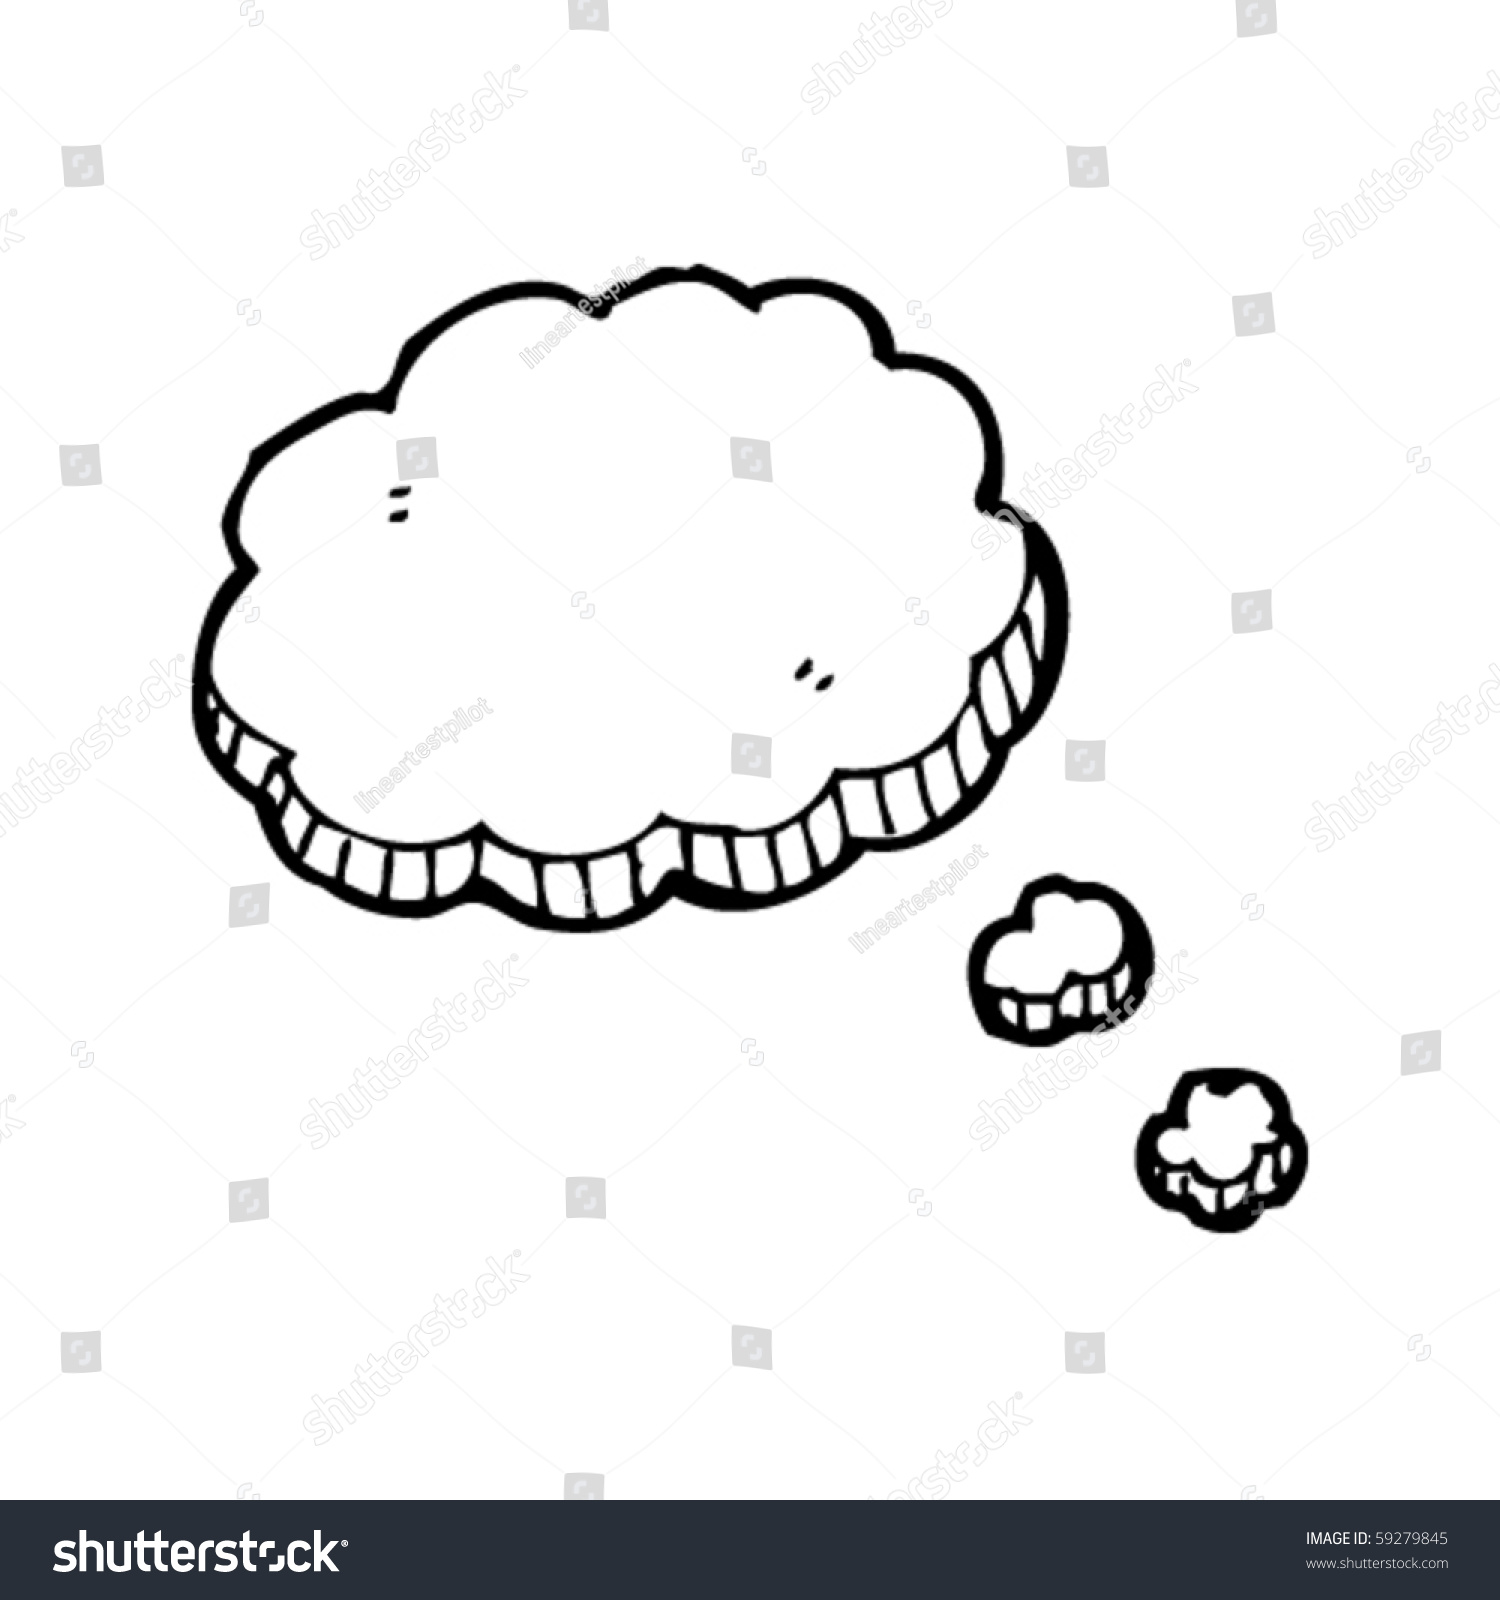 Thought Bubble Drawing Stock Vector (Royalty Free) 59279845